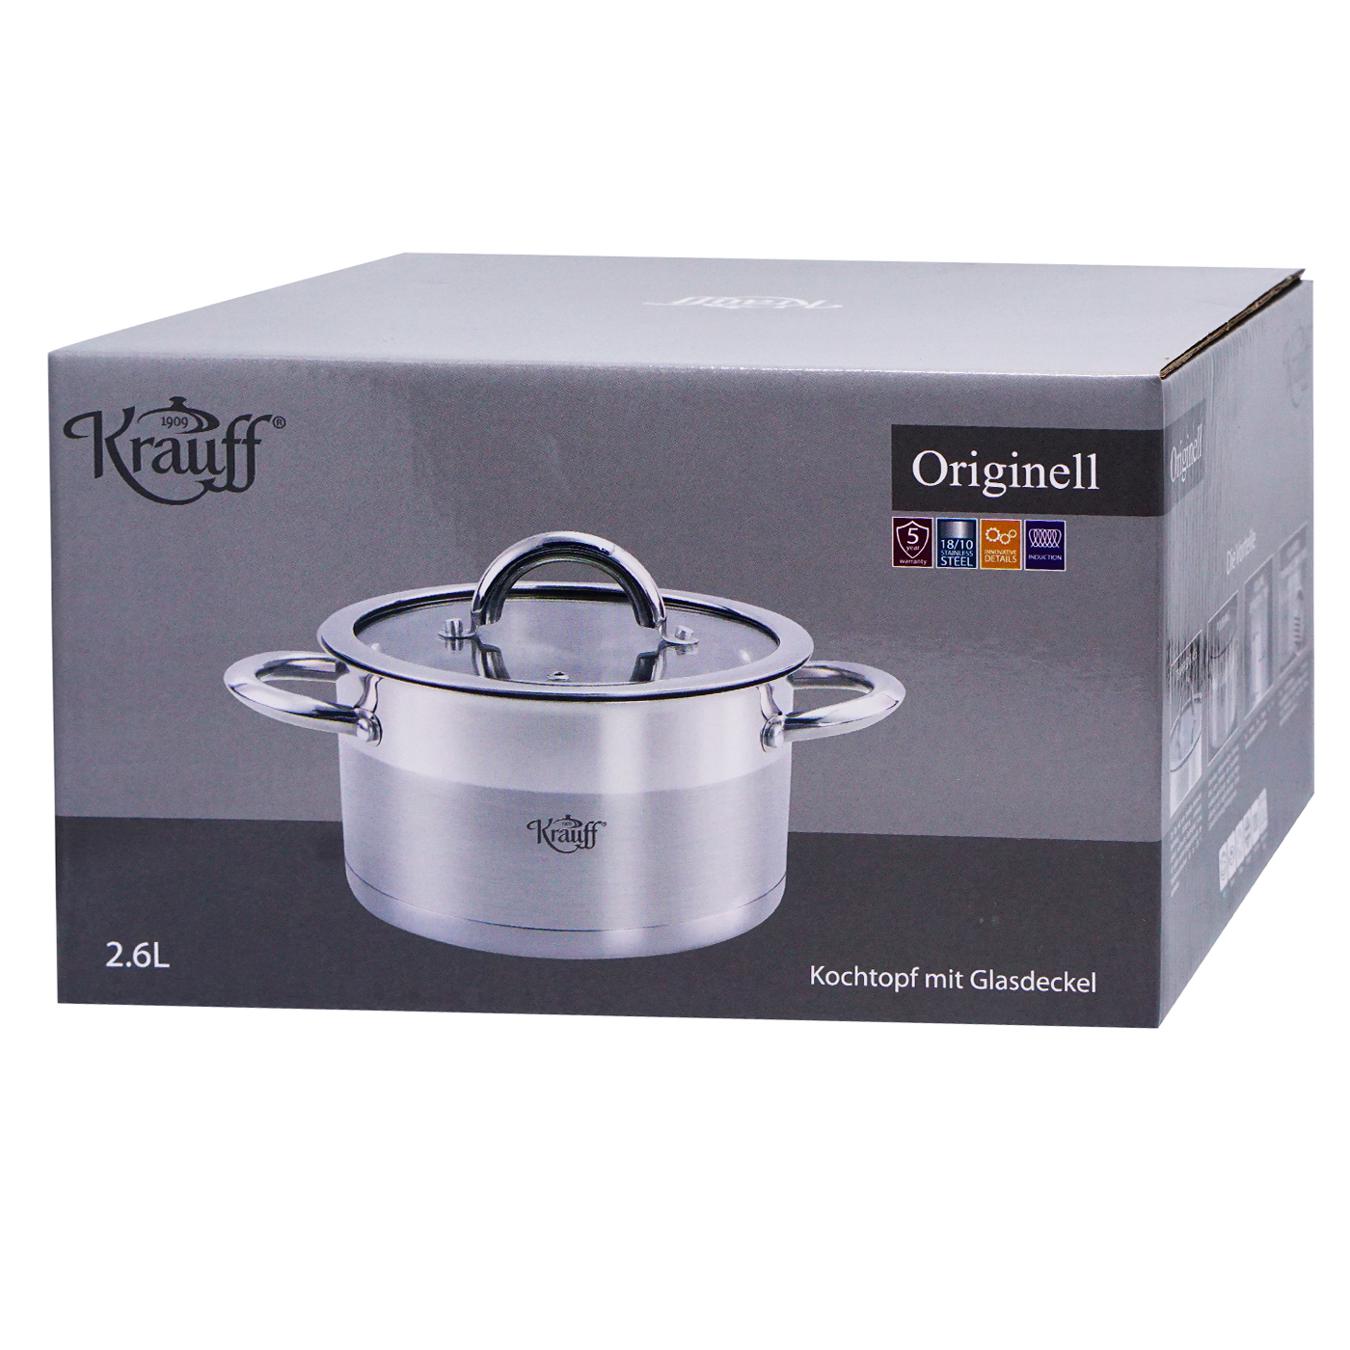 Krauff saucepan with a glass lid and metal handles 2.6 l